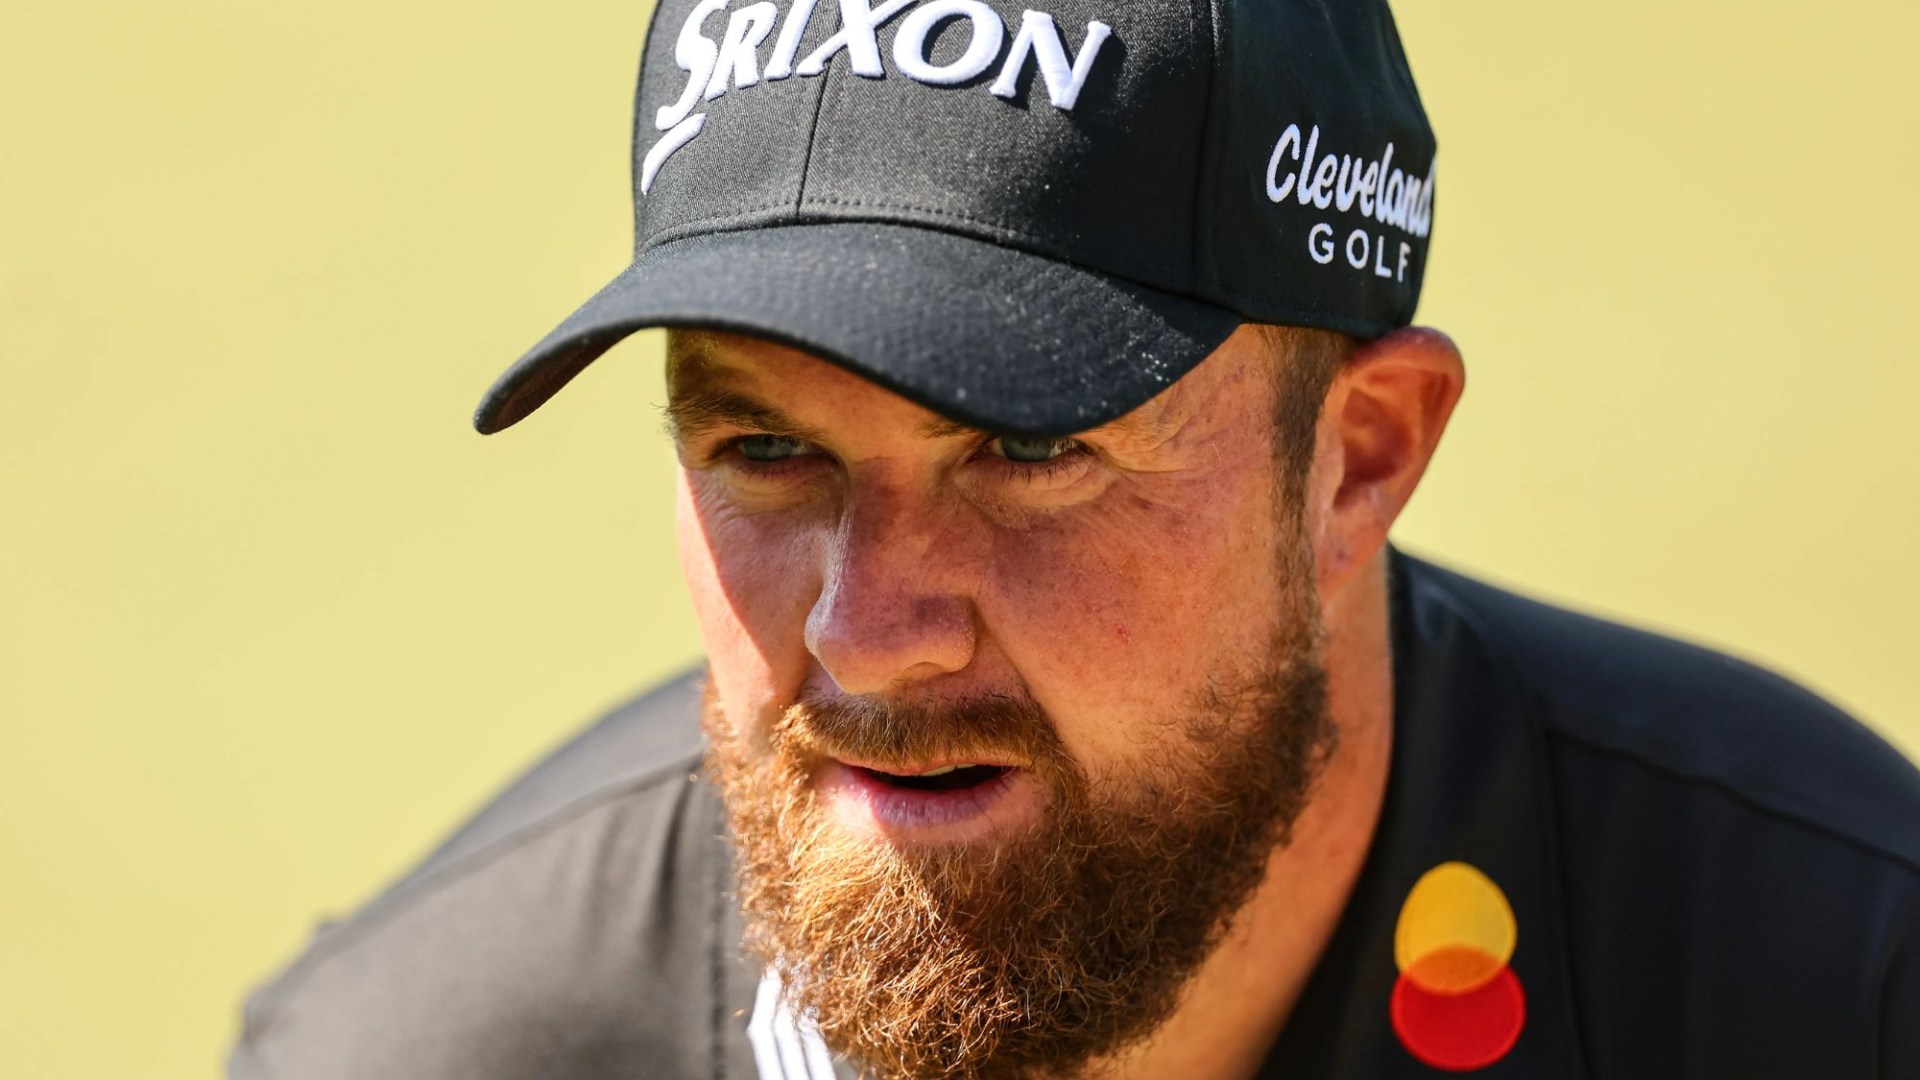 RBC Canadian Open preview and predictions: Shane Lowry’s hot streak can continue with win on familiar Hamilton course [Video]